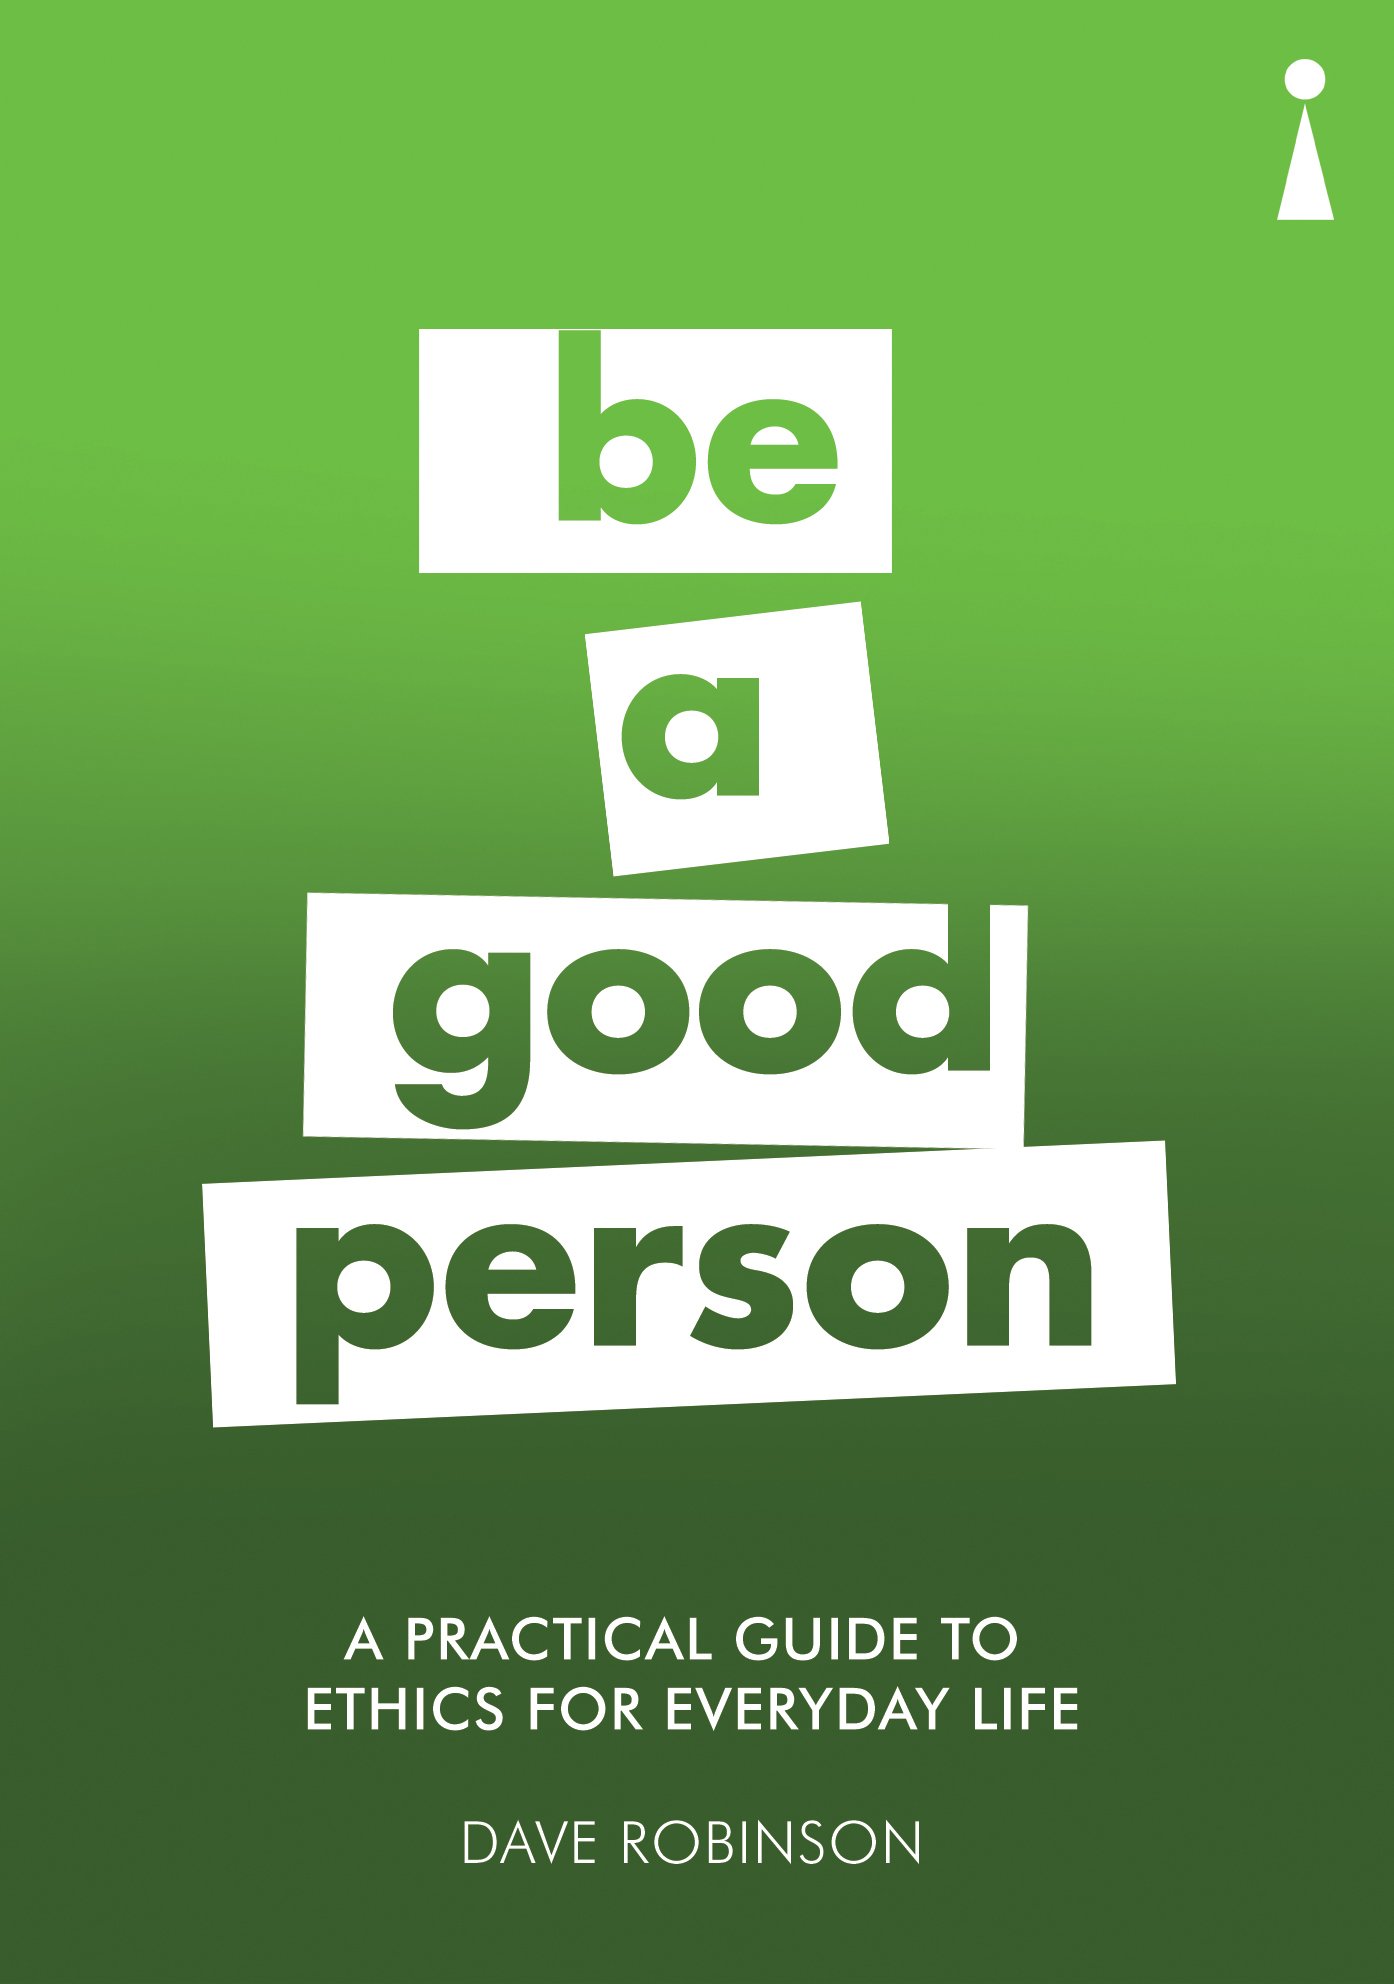 A Practical Guide to Ethics for Everyday Life | Dave Robinson